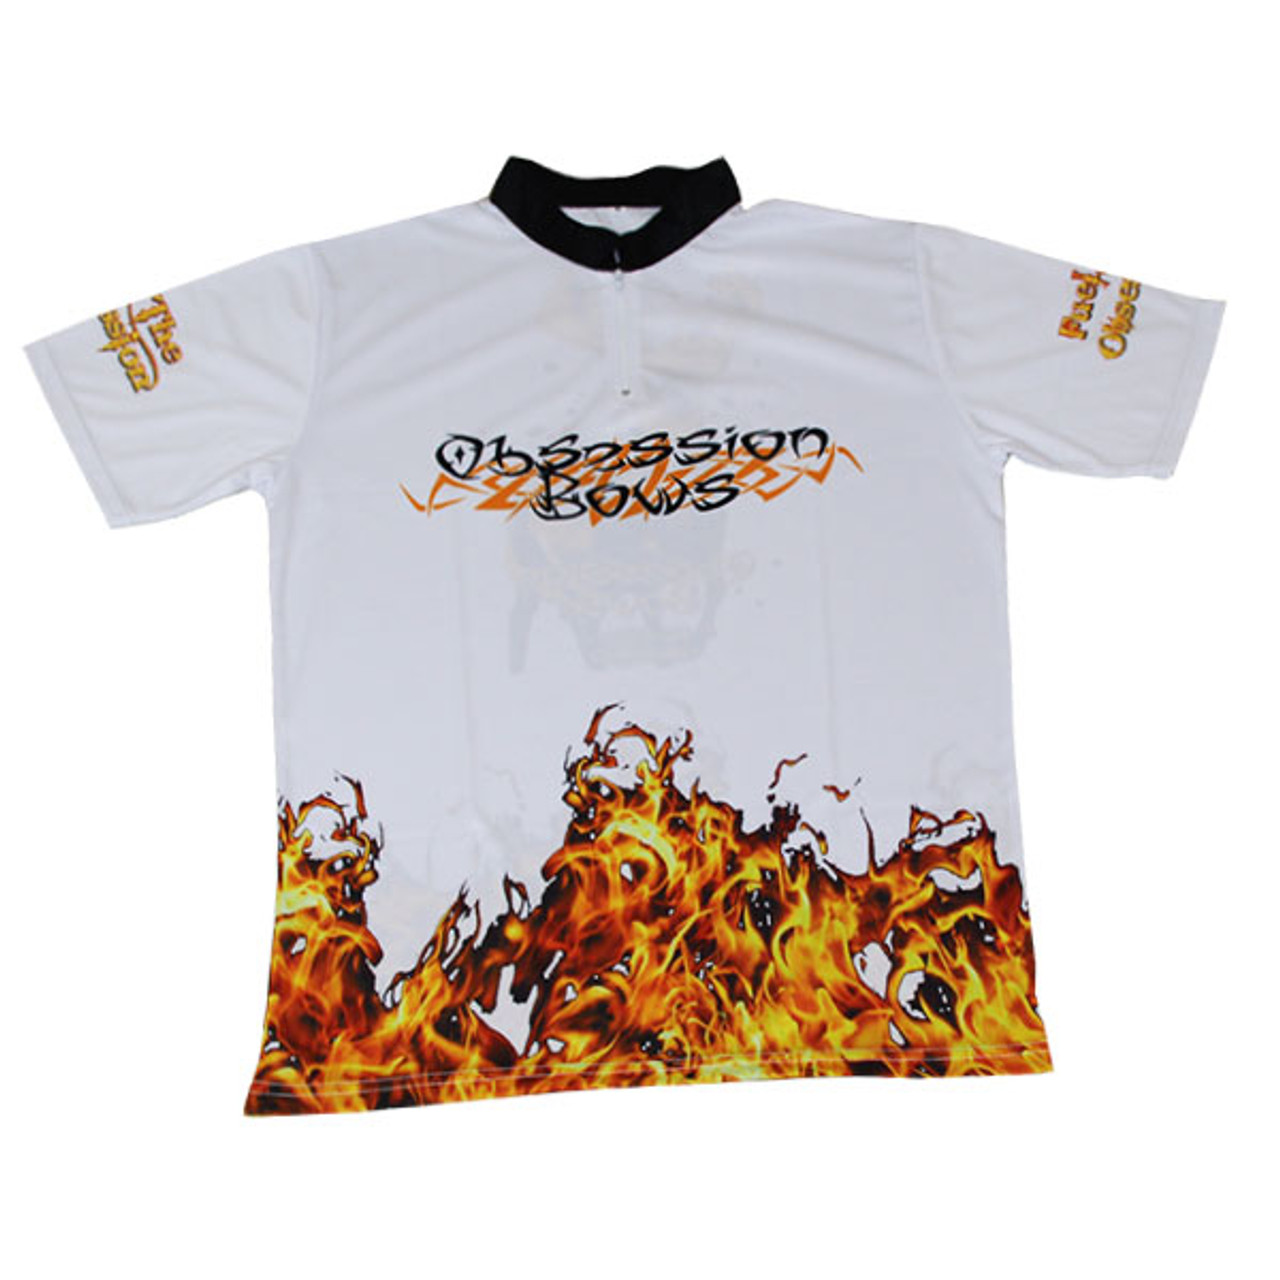 Obsession Flame Jersey - White - Small